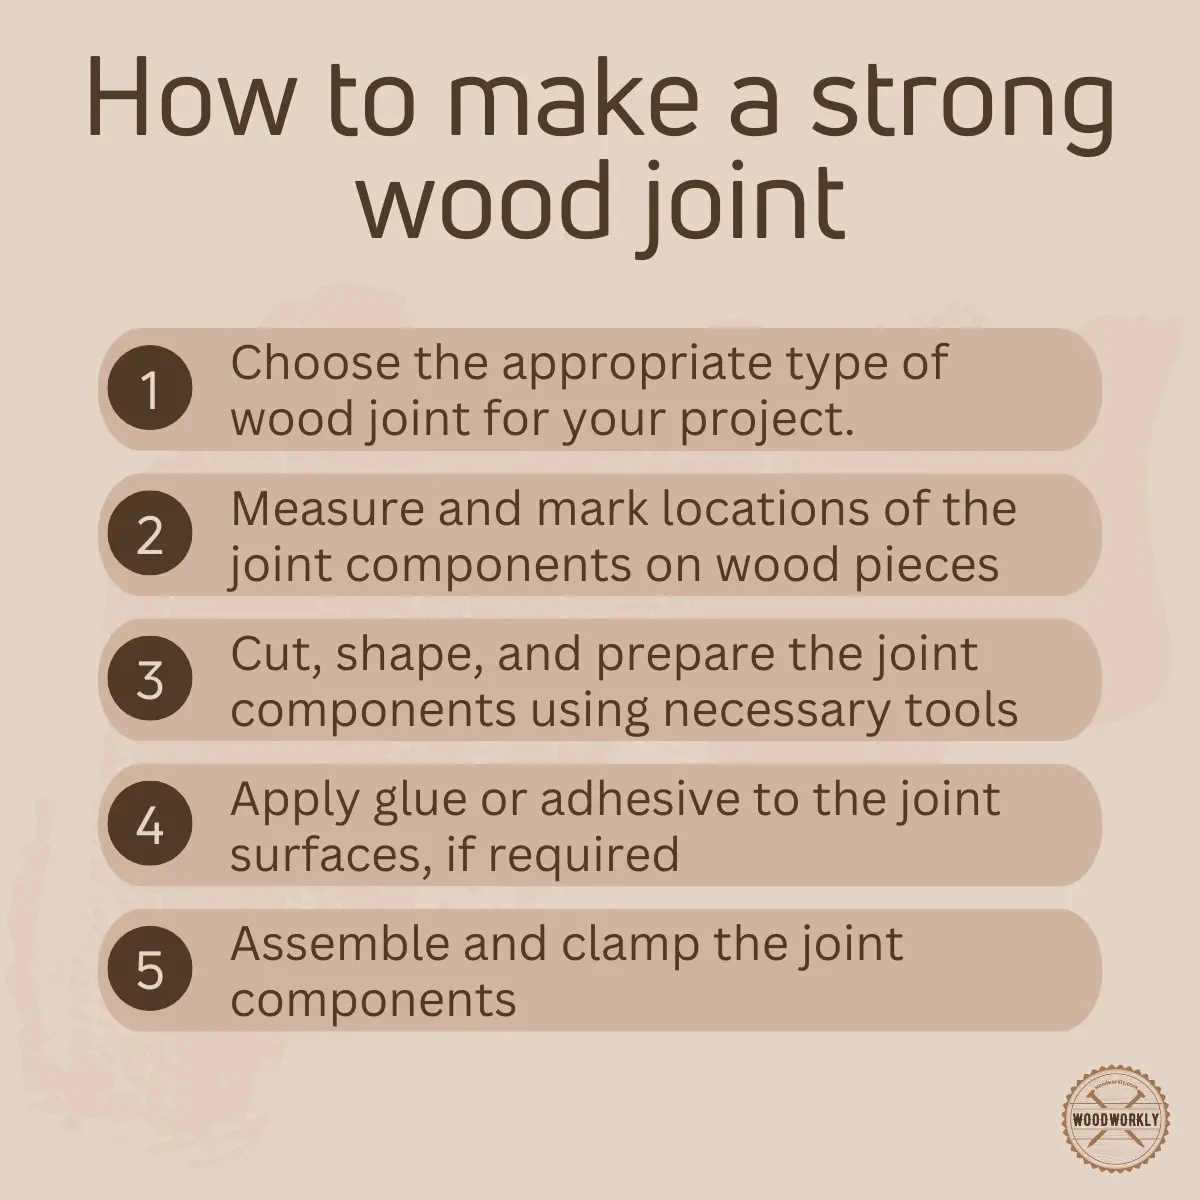 How to make a strong wood joint